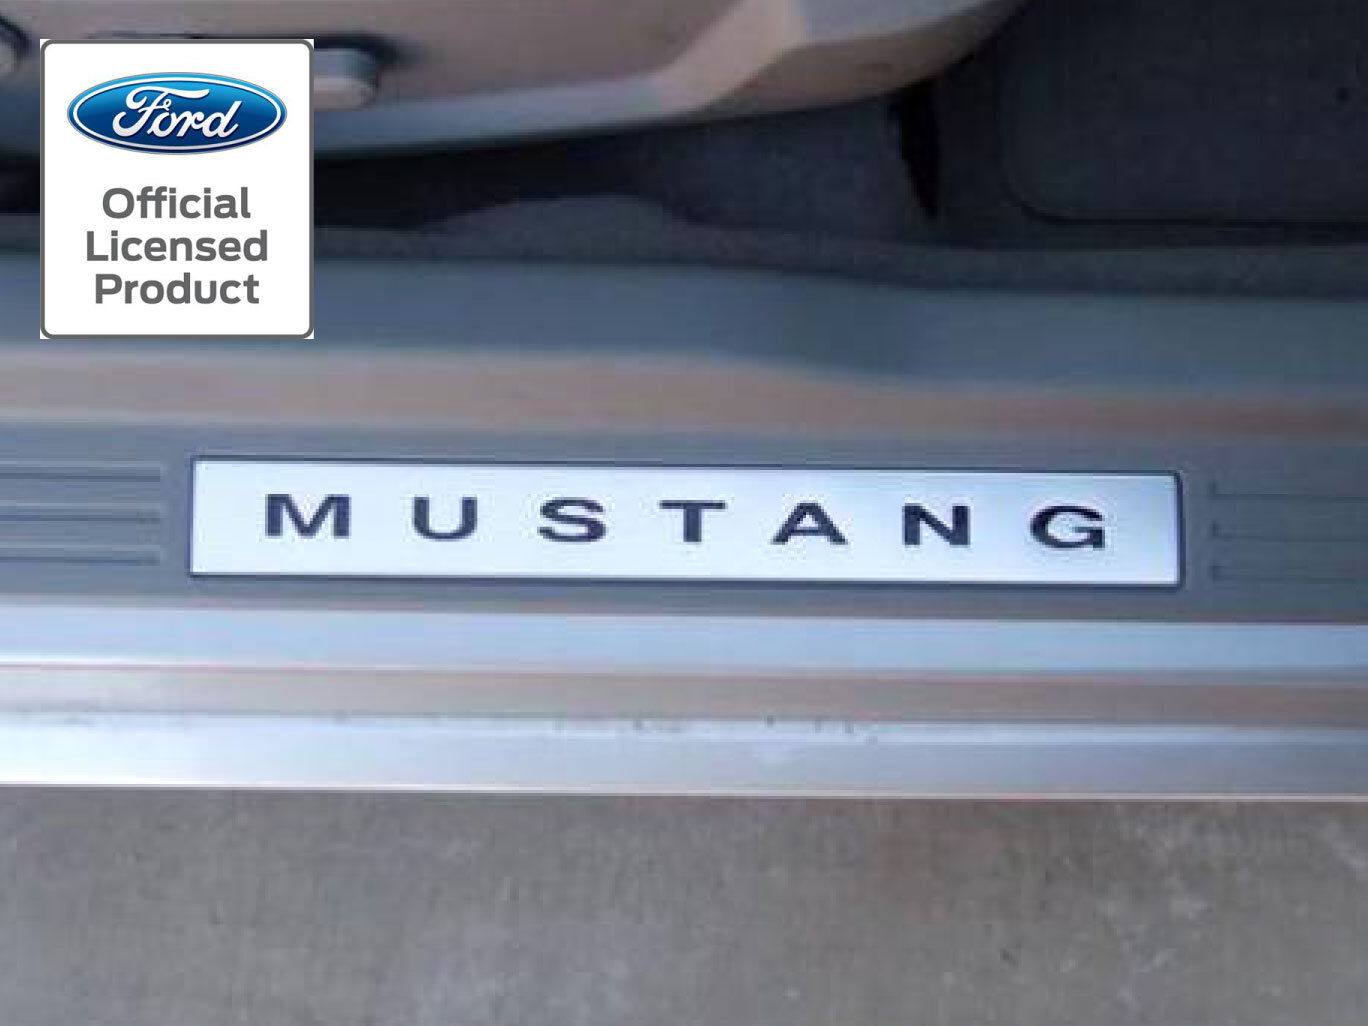 2005-2009 MUSTANG DOOR SILL KICK PANEL LETTERS INSERTS DECALS STICKERS 2010-2014